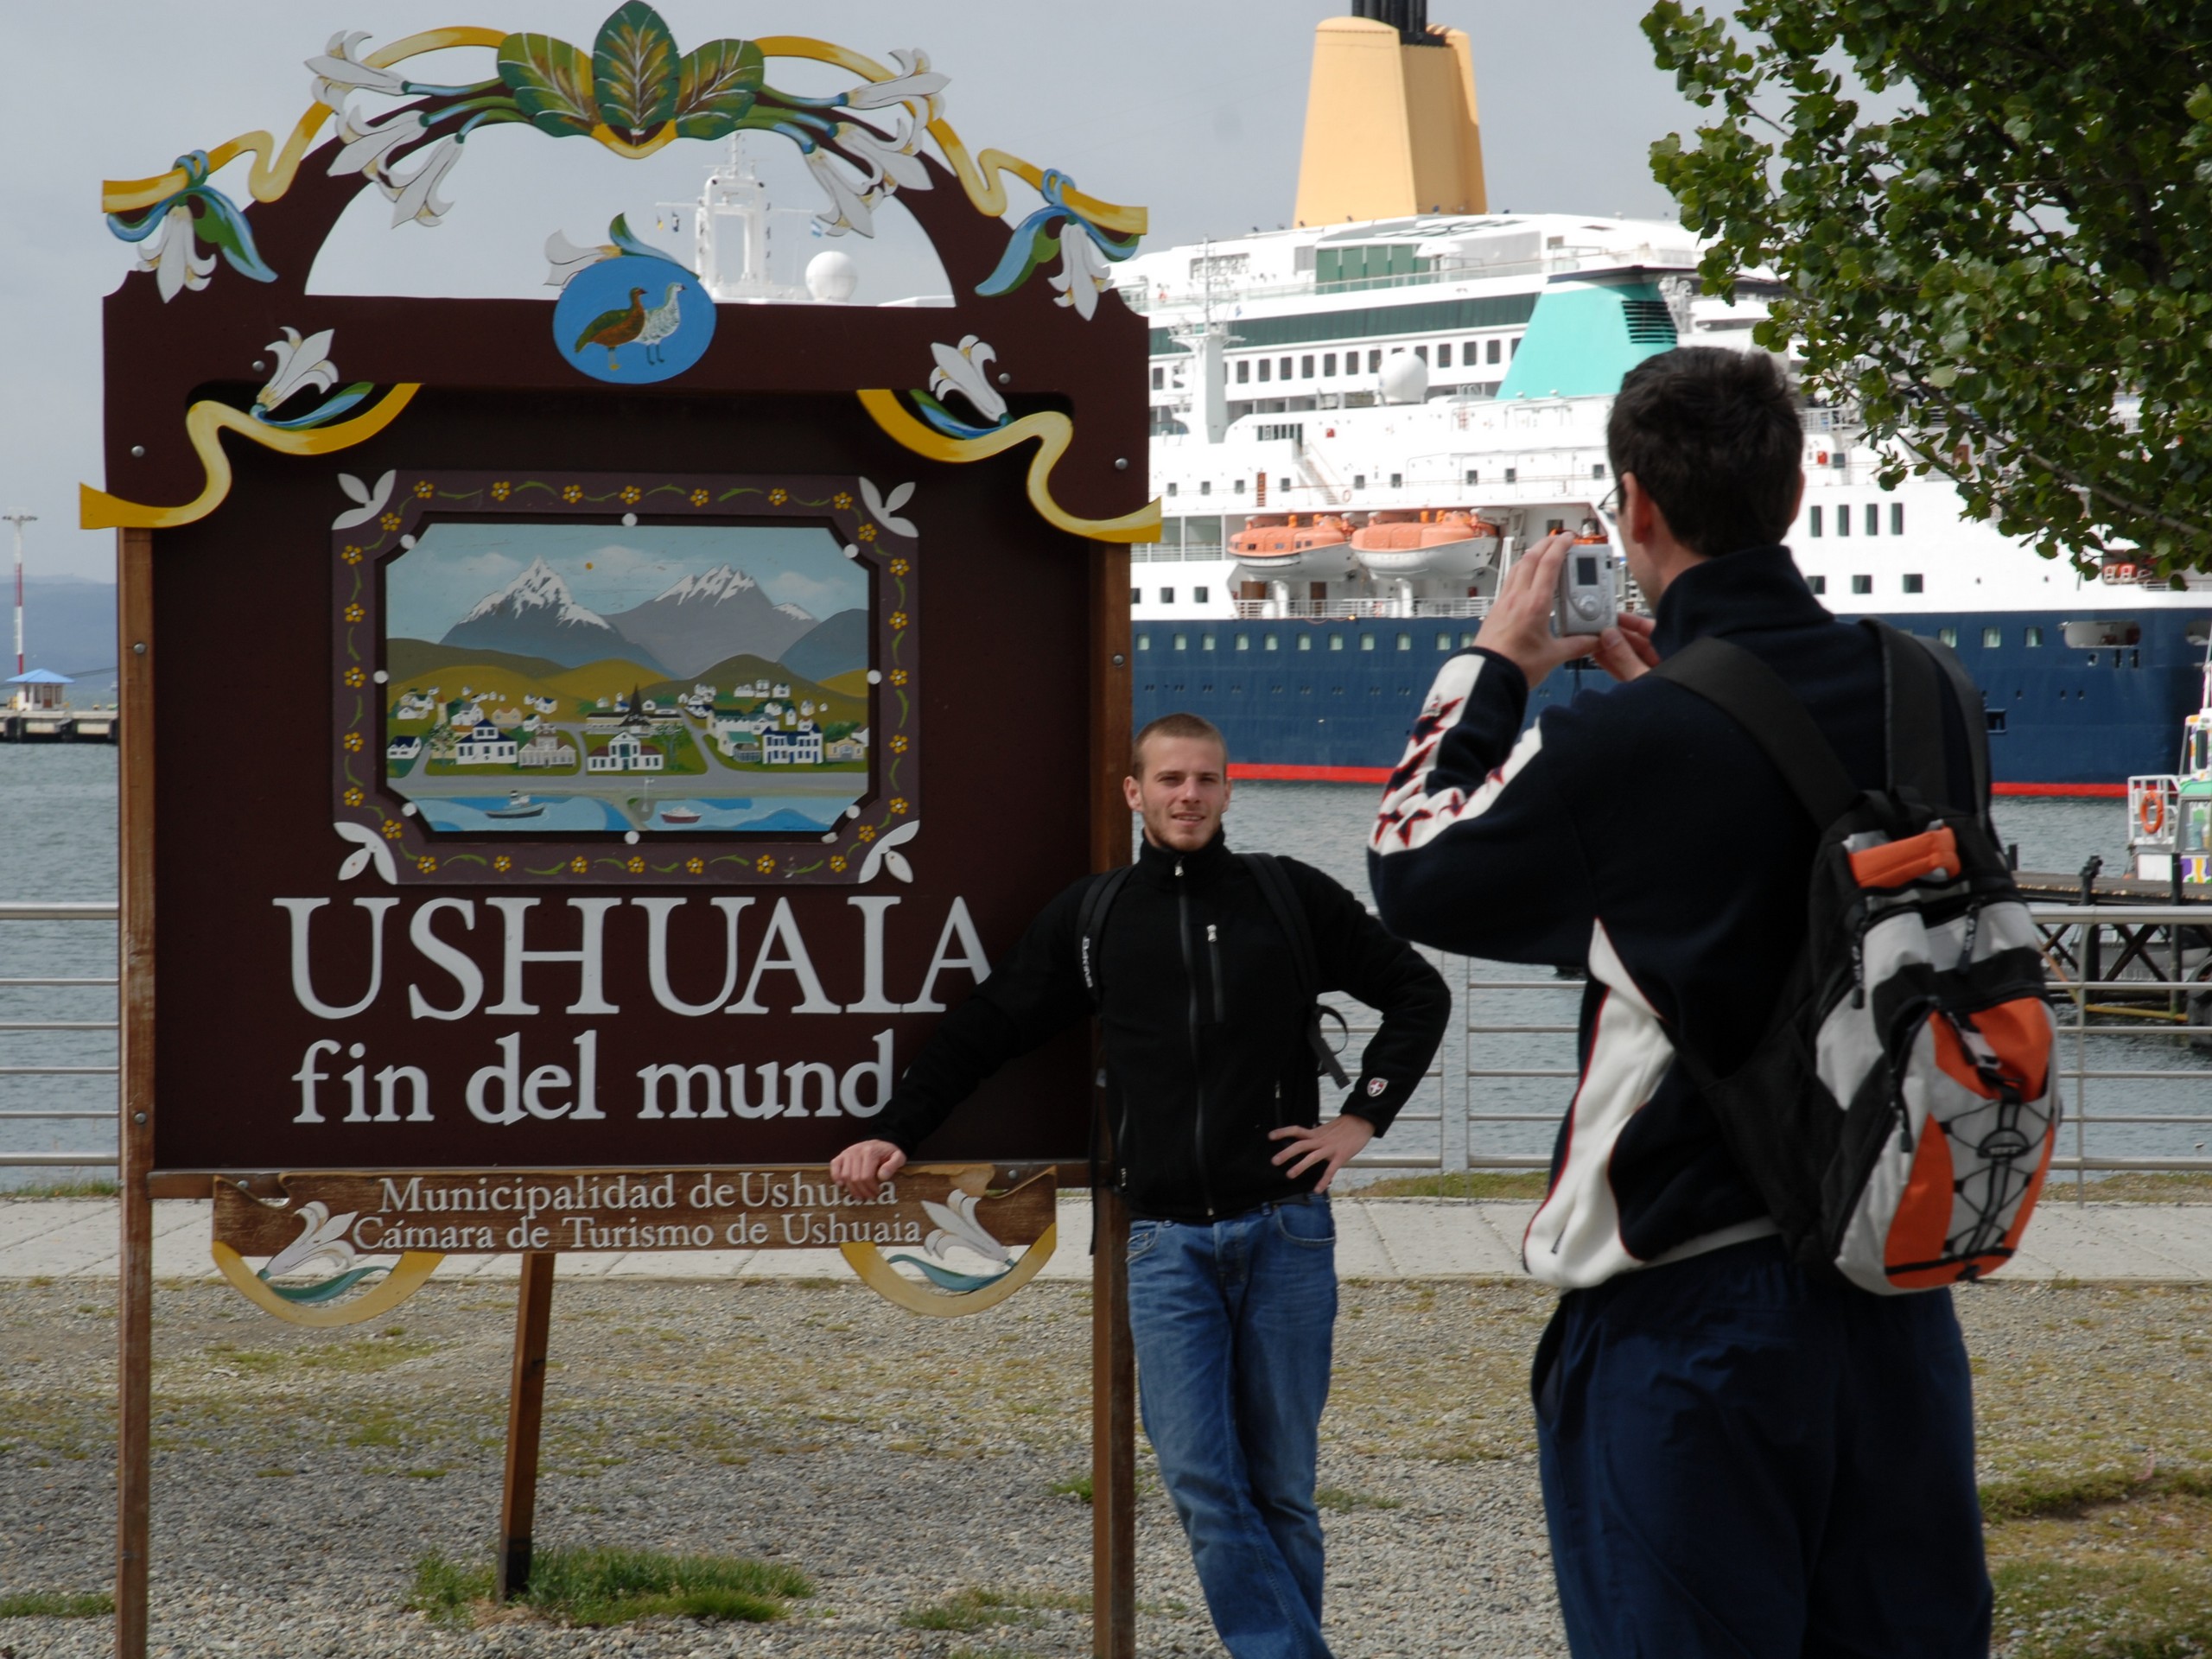 Posing near the sign in the harbor of Ushuaia